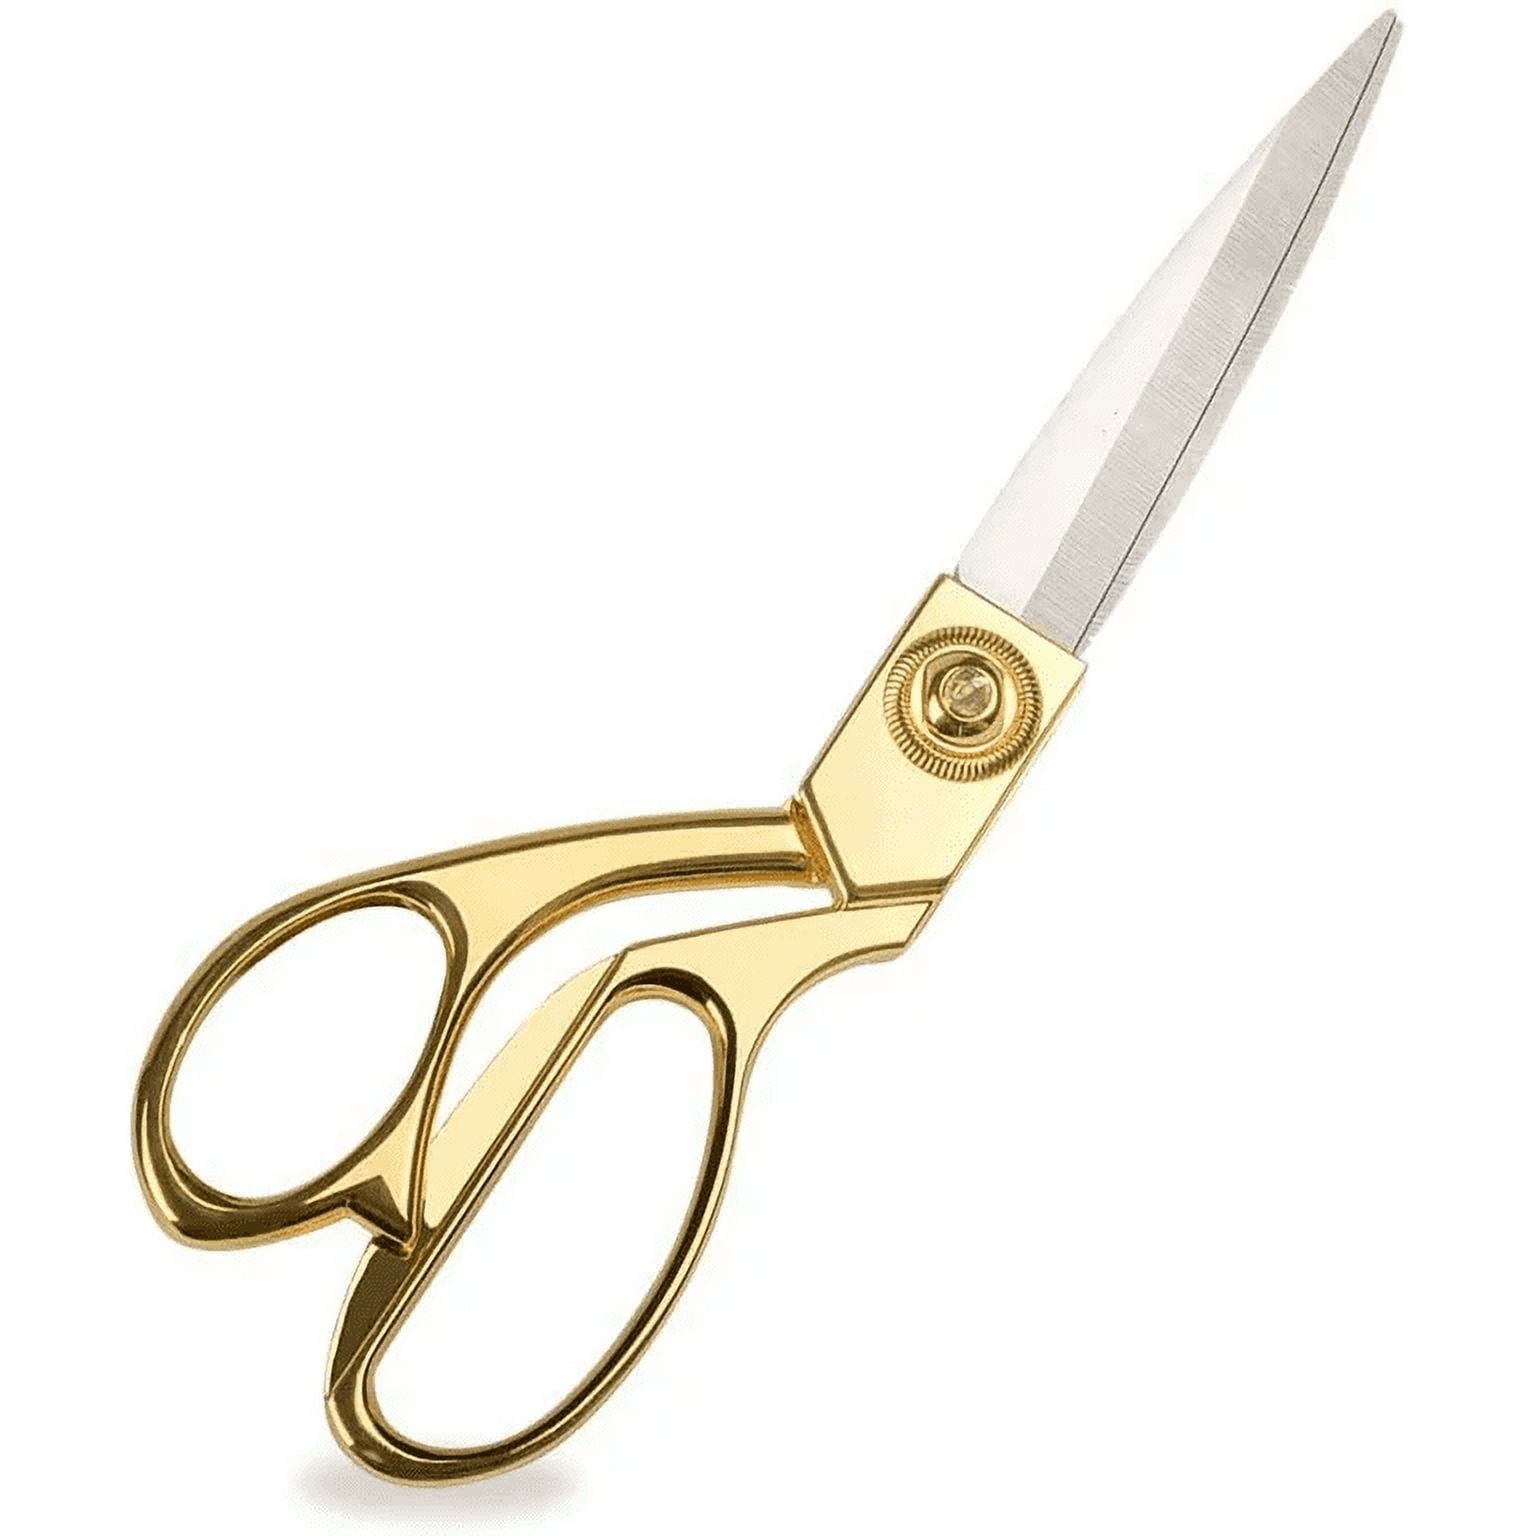 Heavy Duty All Metal Stainless Steel Shears Craft Scissors Tailor Scissors  for Cloth Paper